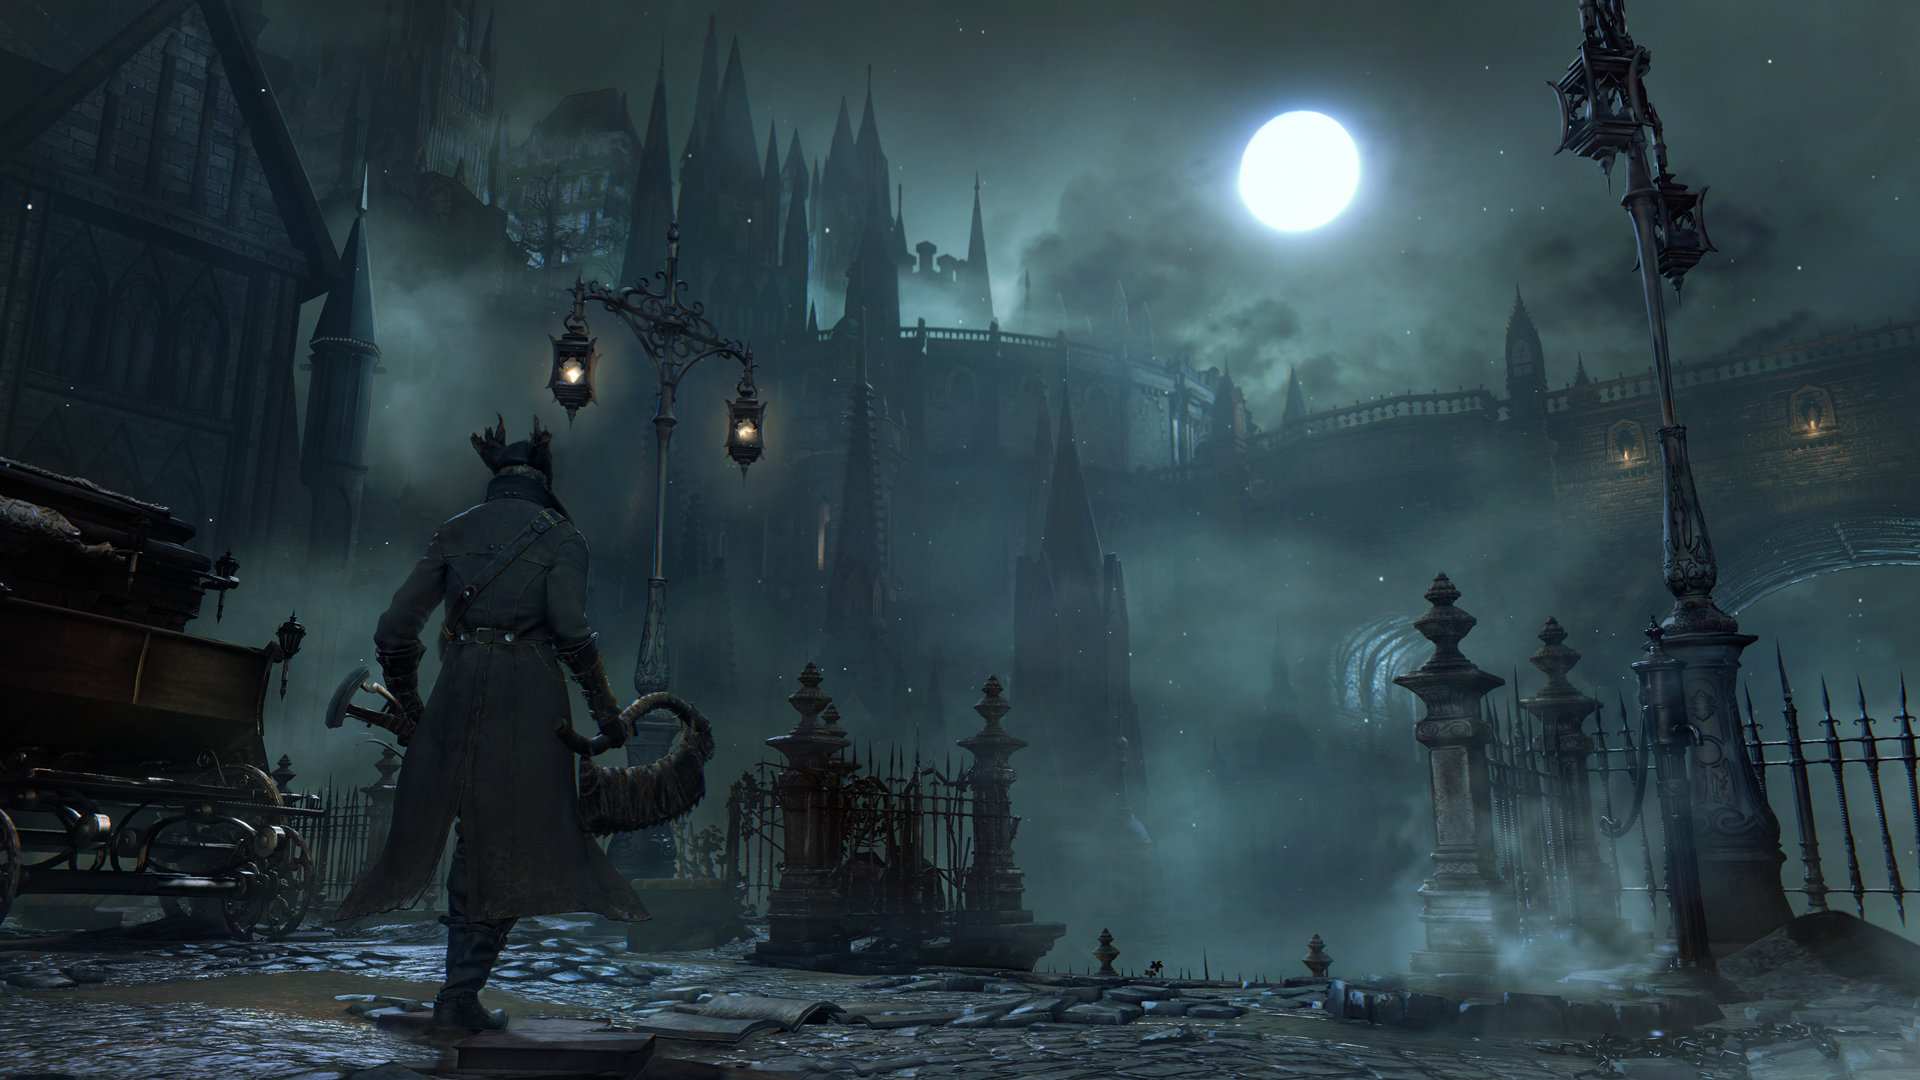 “Bloodborne” Pushed to March Release - Delayed to Ensure Best Experience